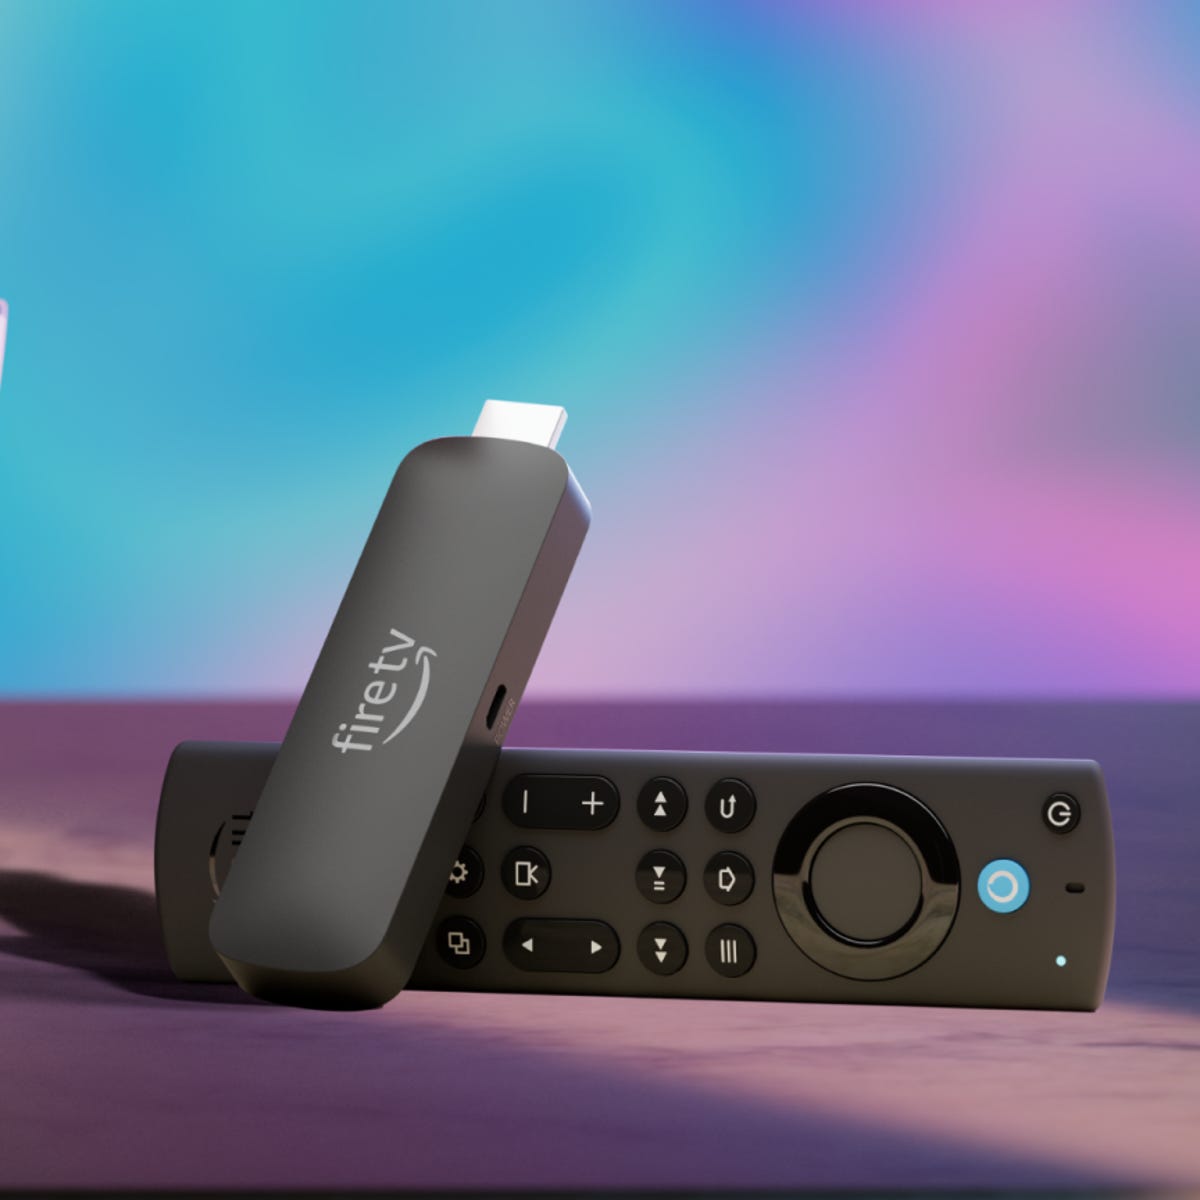 Updates Fire TV Sticks With New 4K and 4K Max Versions - CNET